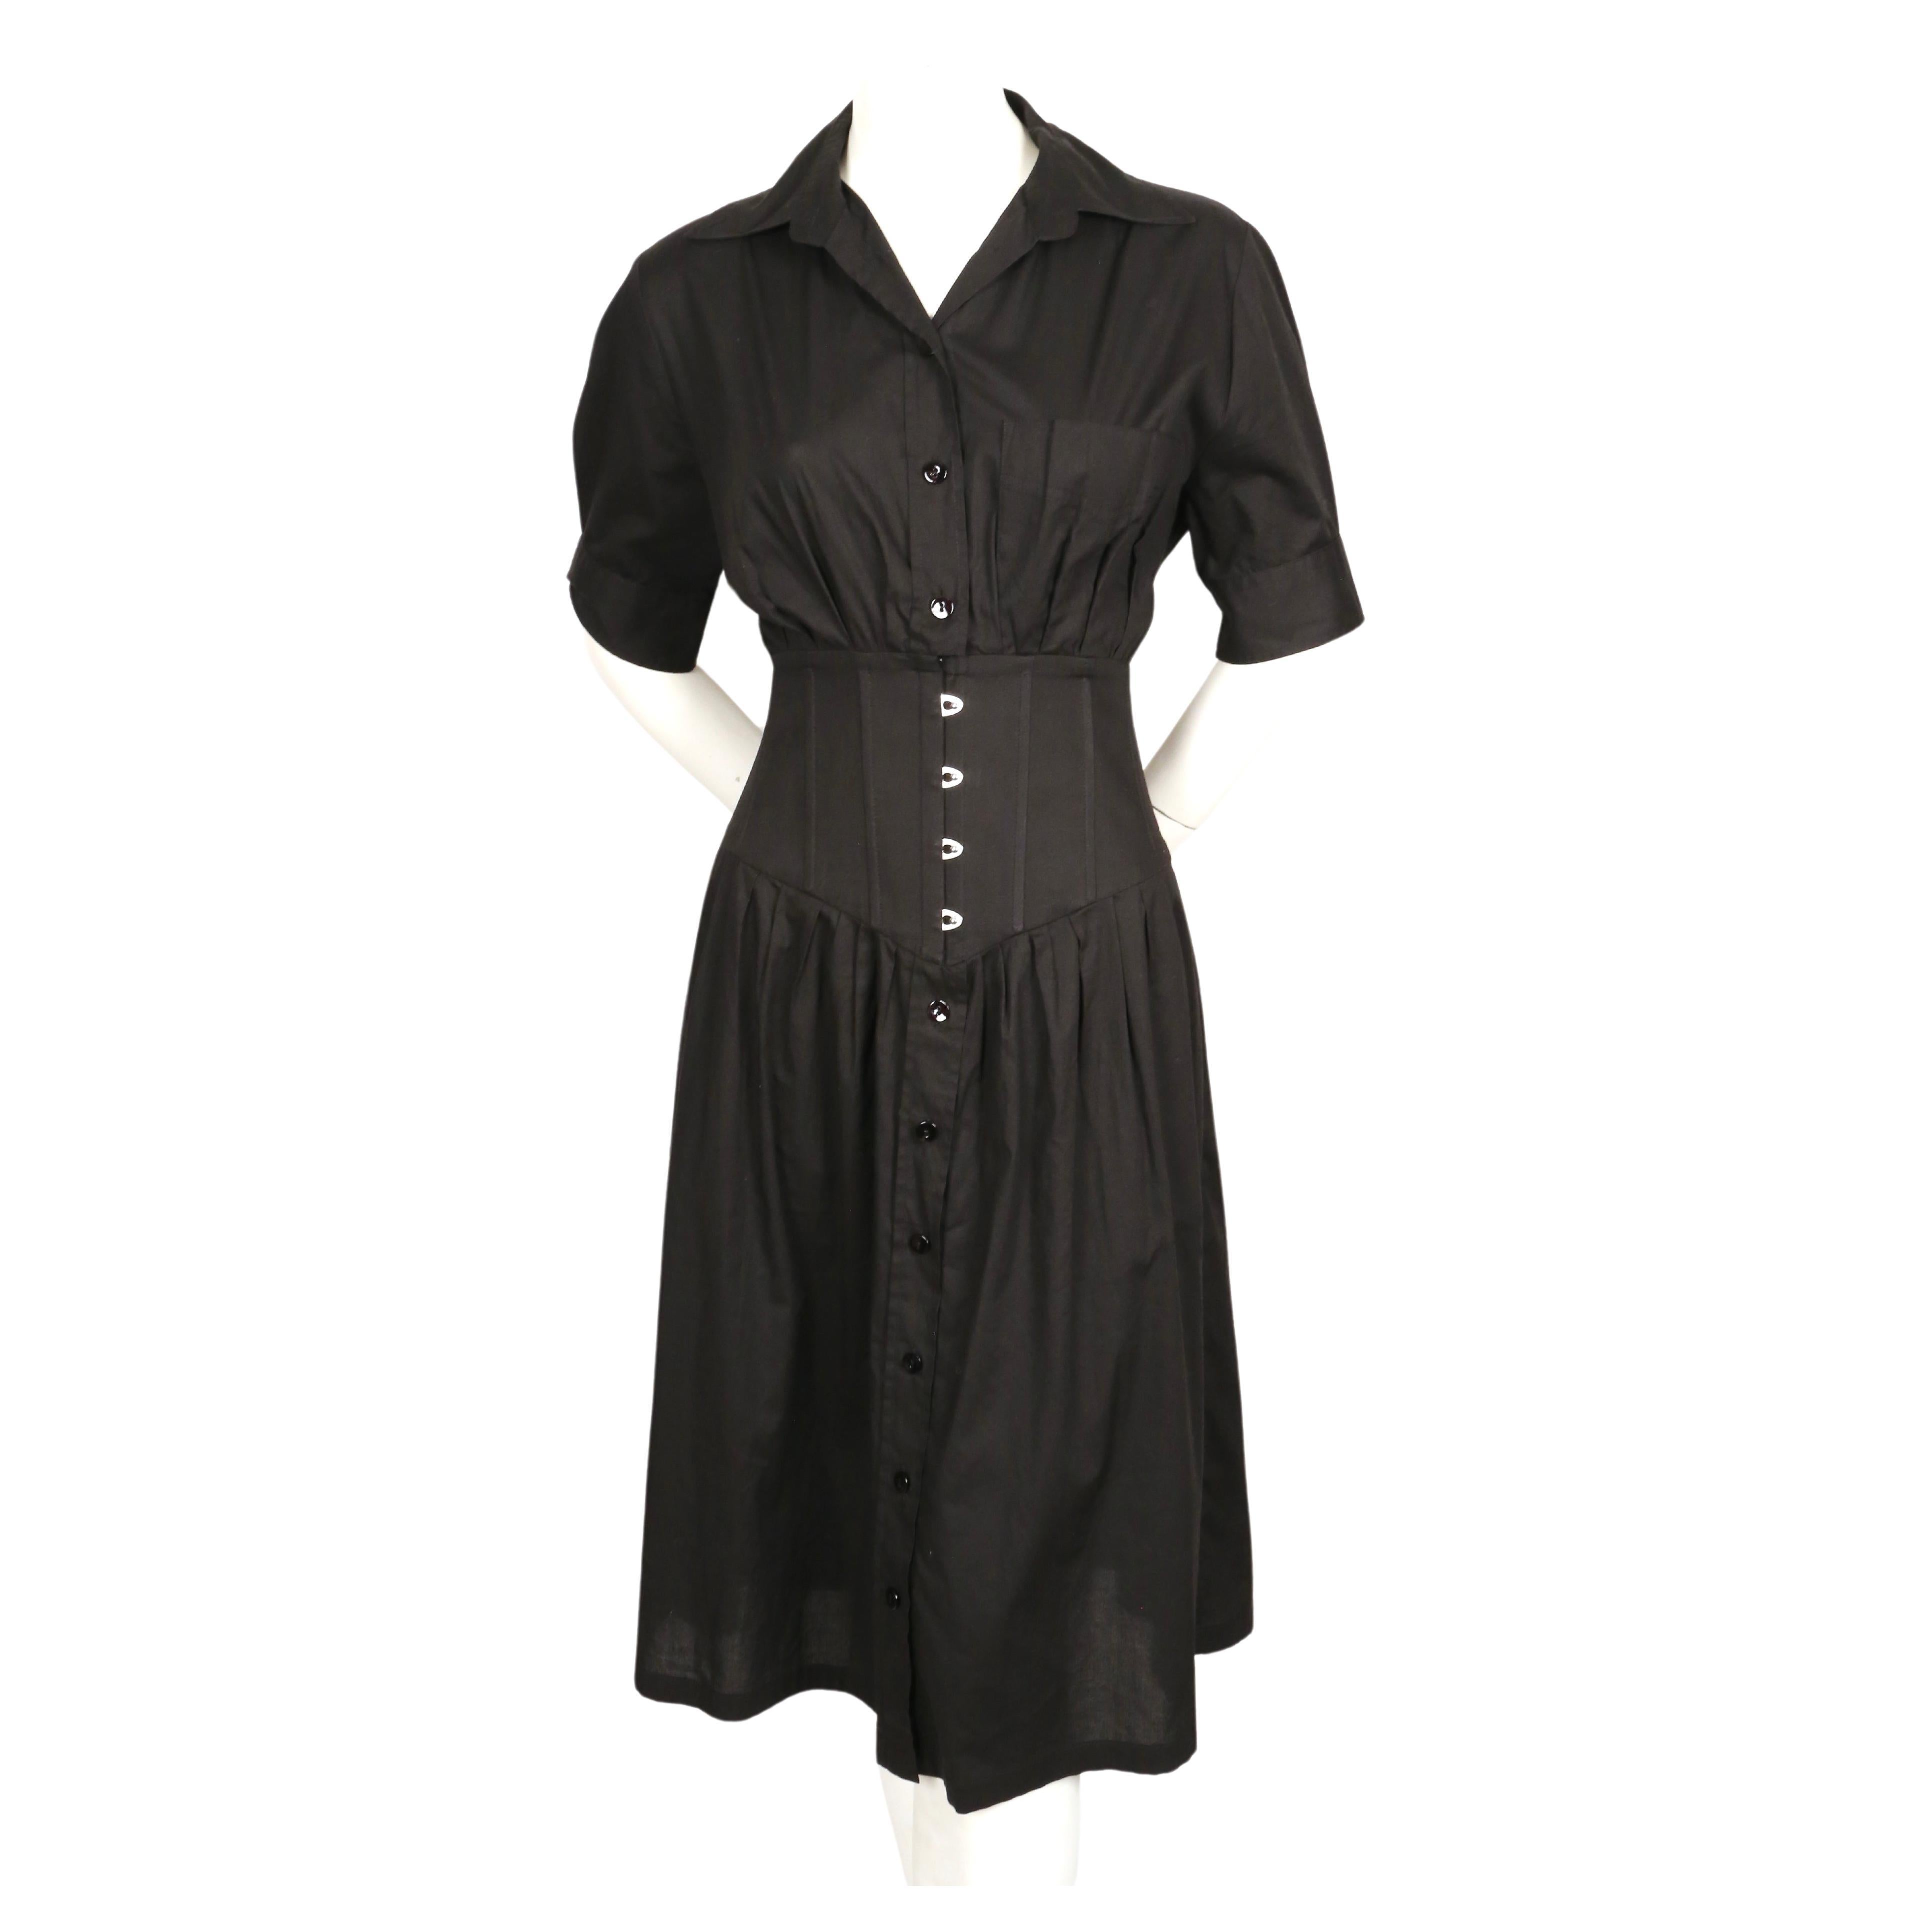 Black shirt style dress with corseted waist designed by Jean Paul Gaultier dating to the early 2000's. Labeled a French size 40 (Italian 44). Approximate measurements: shoulder 15.5